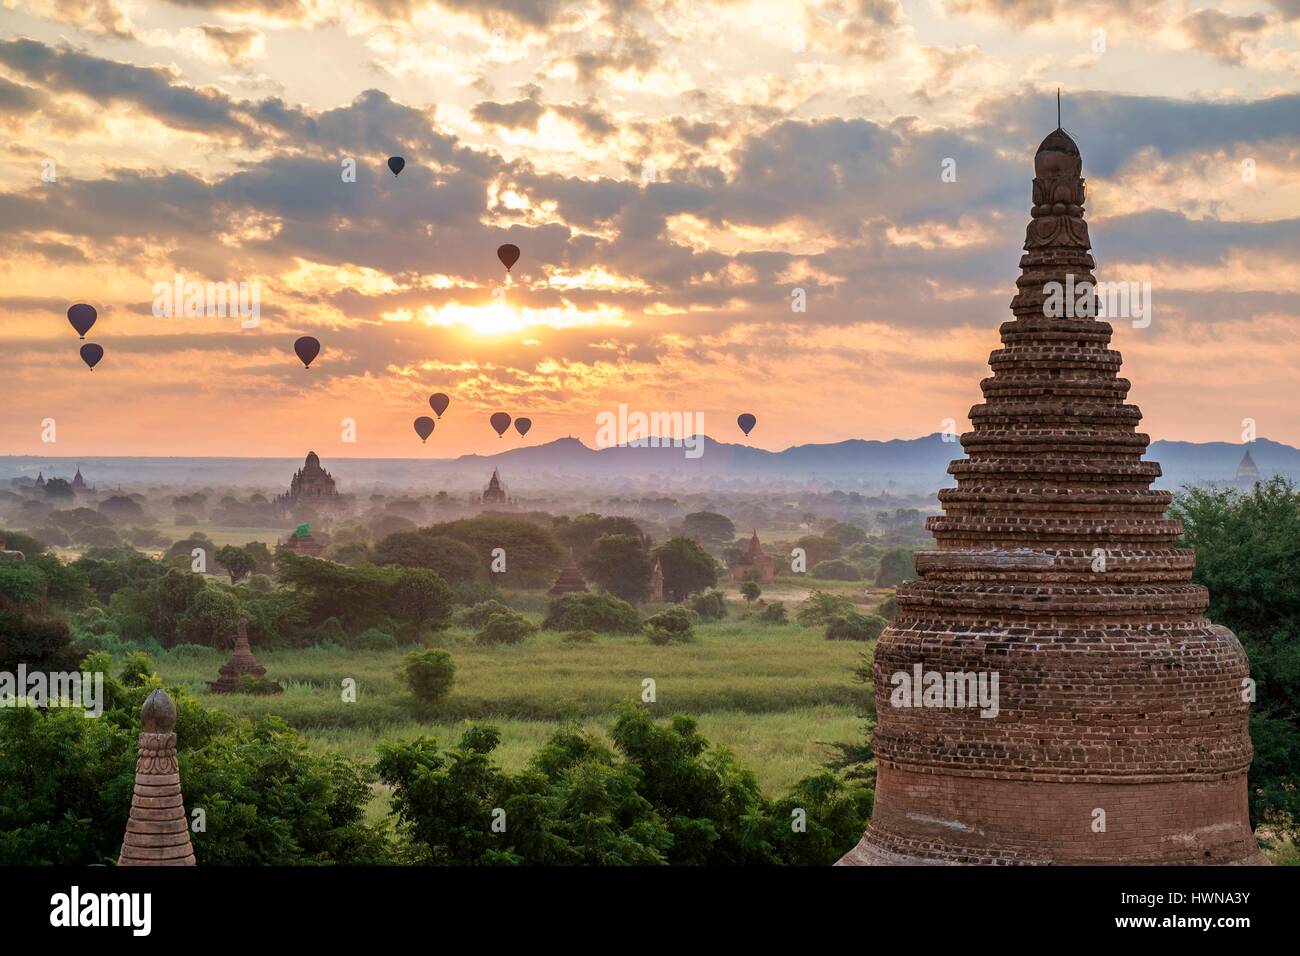 Myanmar (Burma), Mandalay region, hot air-balloon trip over the buddhist archeological site of Bagan at sunrise, more than 2000 temples built between the 11th and 12th centuries Stock Photo